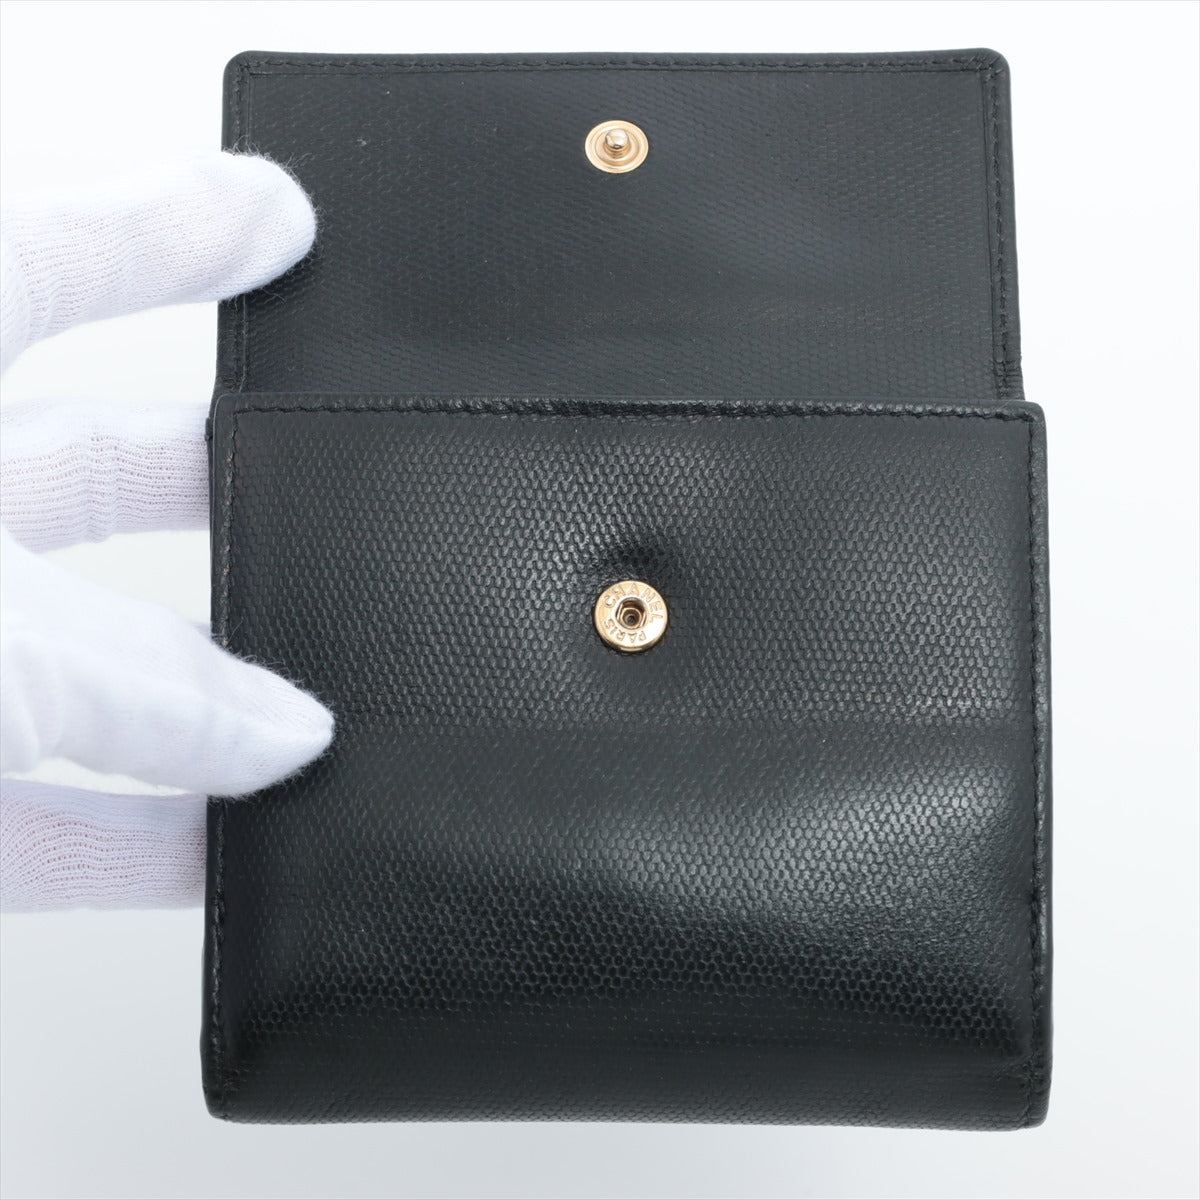 Chanel Coco Button Leather Wallet Black Gold Metal fittings 14XXXXXX